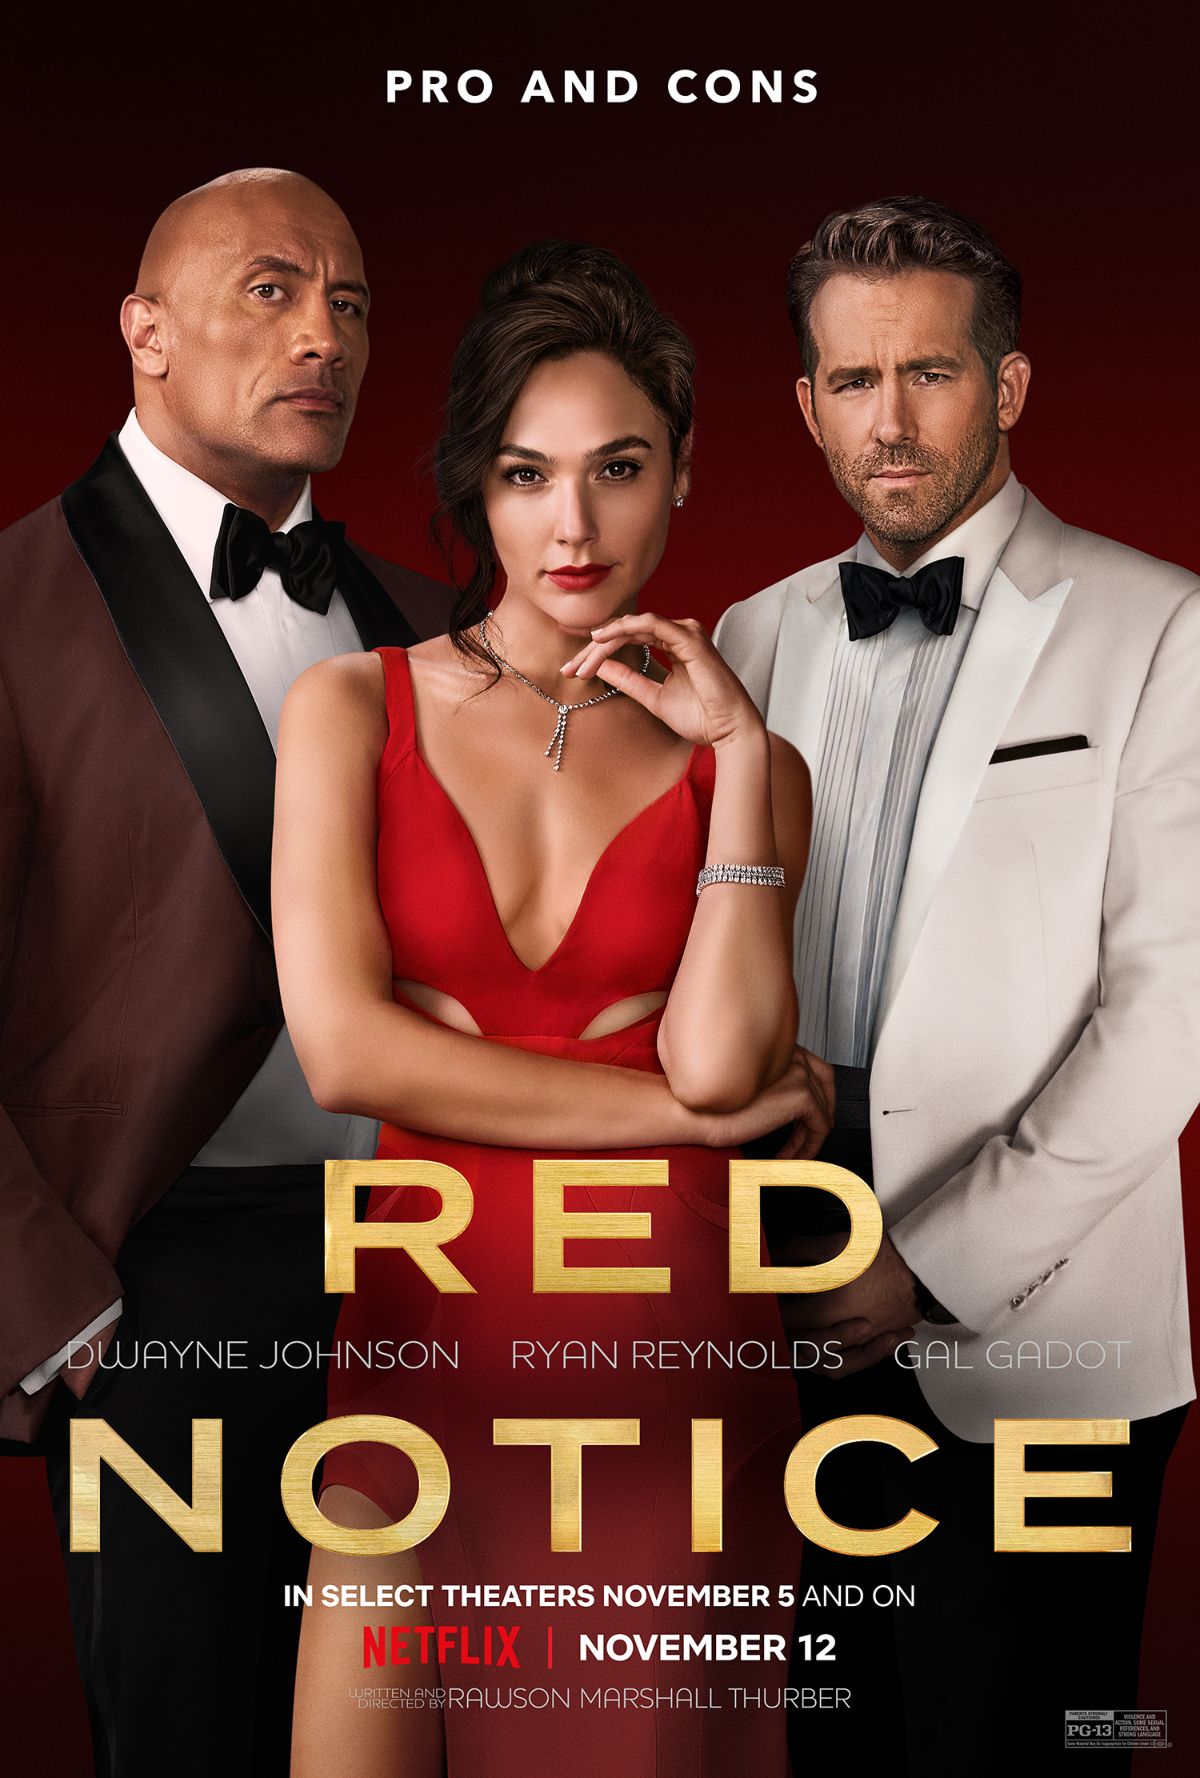 the red notice movie review